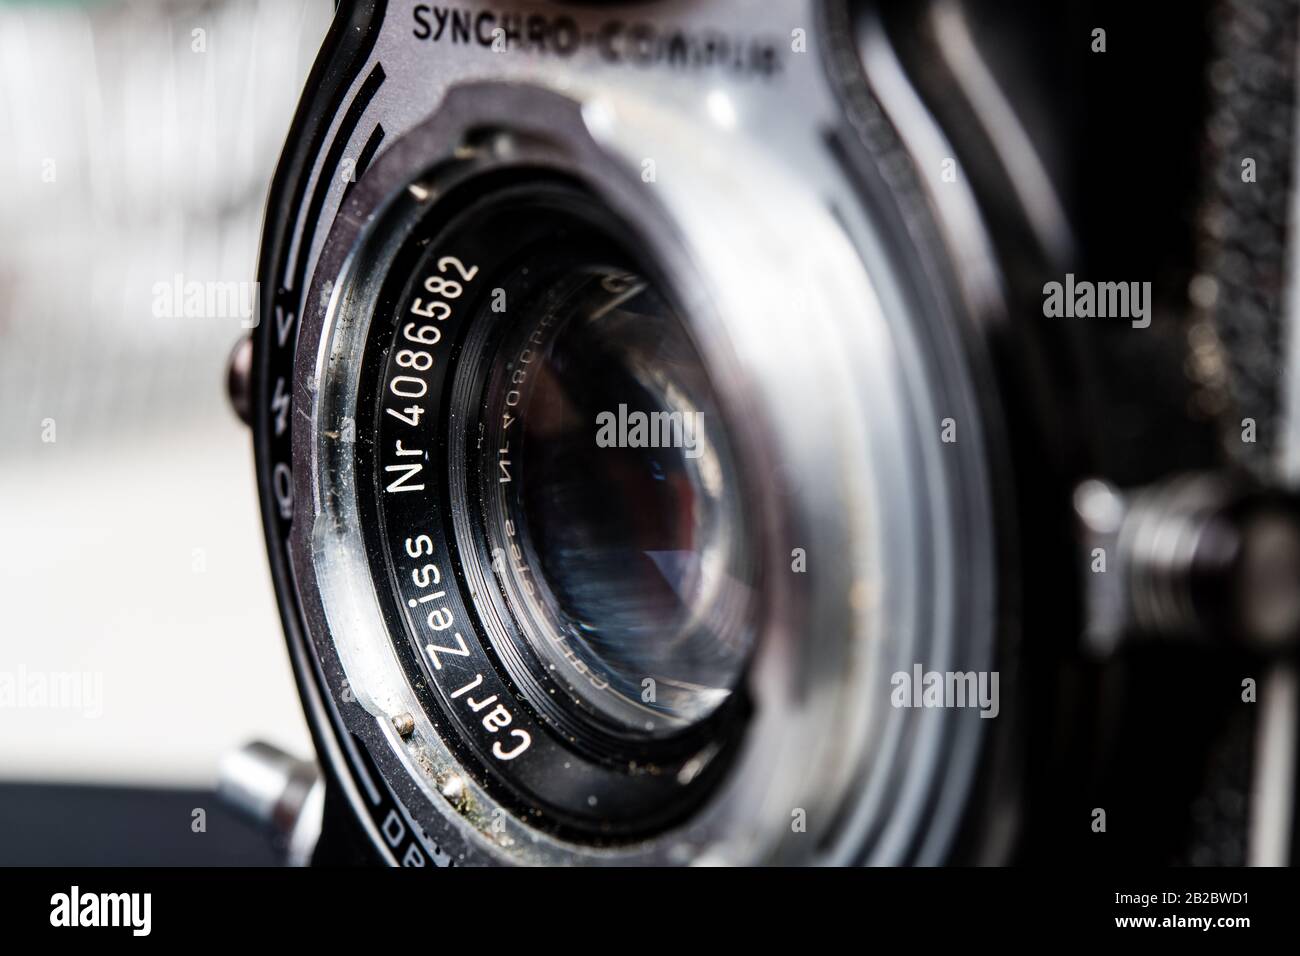 ROME, ITALY - march 2020. Carl Zeiss lens name detail on vintage retro Rolleiflex photo camera lens Stock Photo